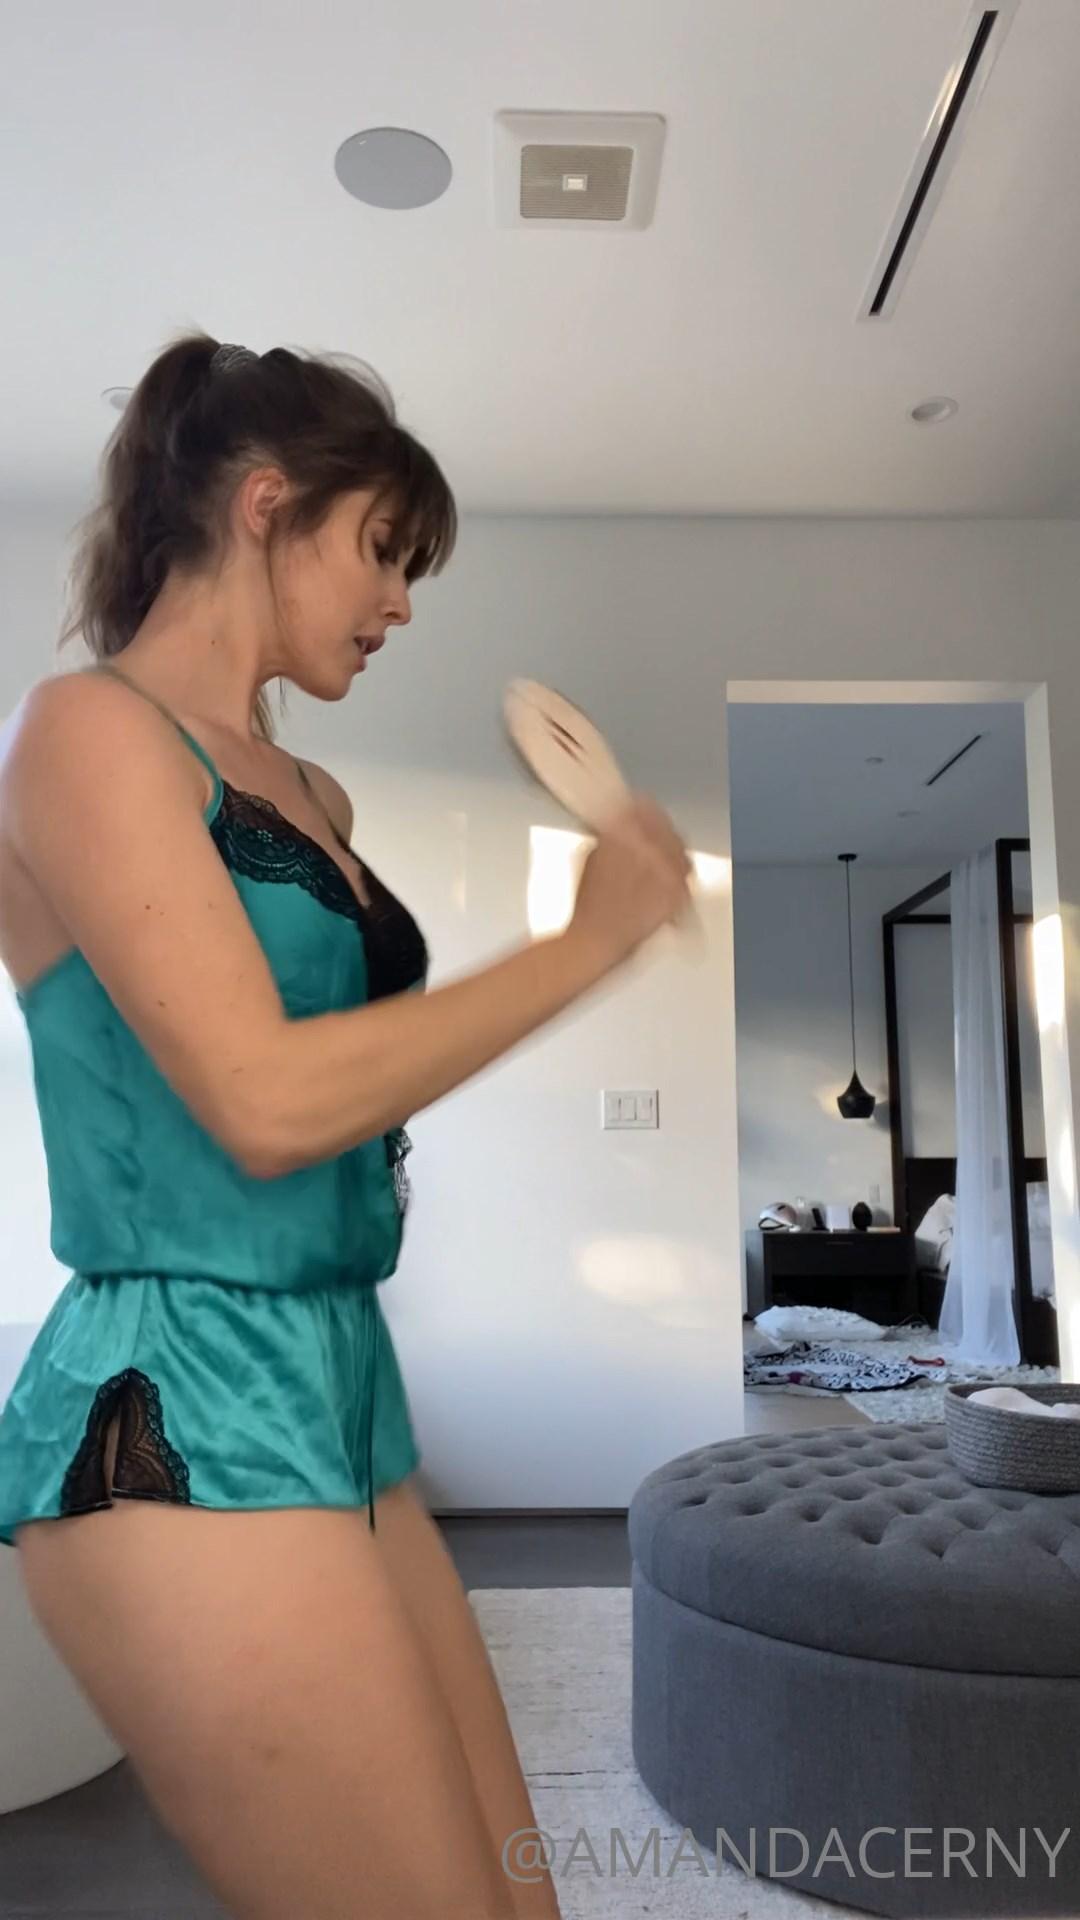 amanda cerny sexy camisole dance onlyfans video leaked ZDZWVE